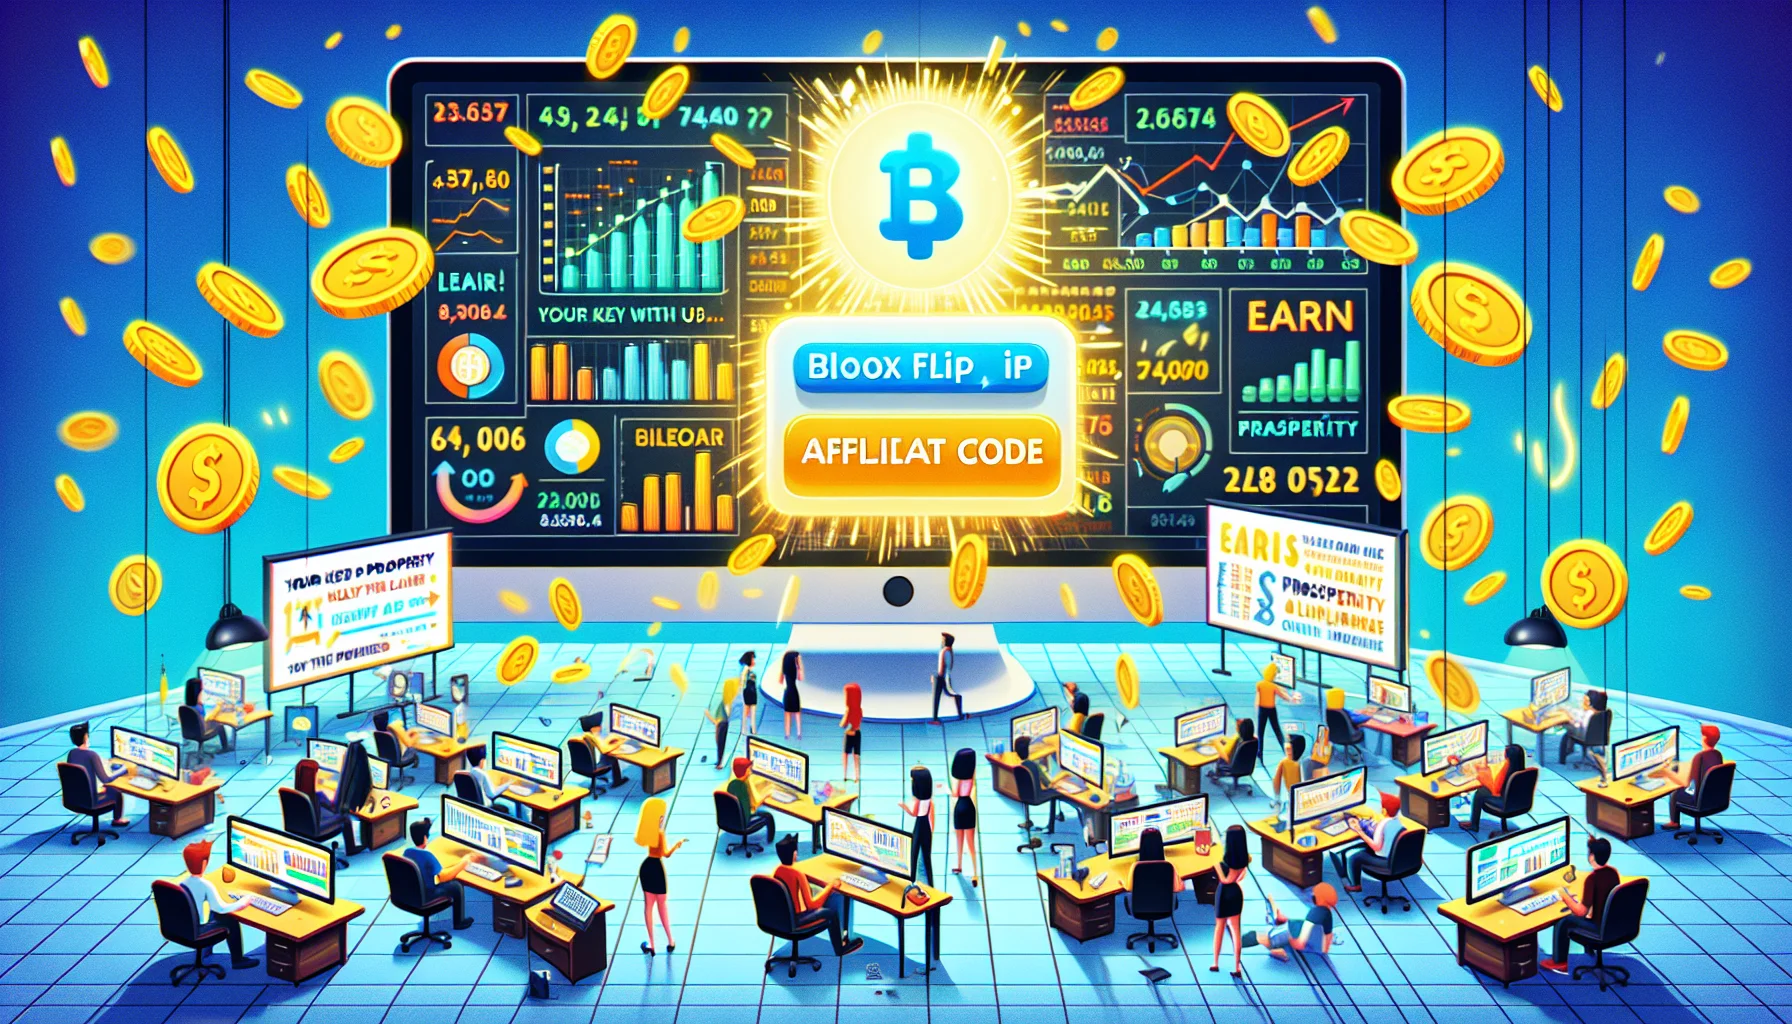 Imagine a cartoon-like scene set in a bustling virtual office space. Employees are in diligent action, some behind computer screens displaying graphs and charts, some discussing numbers on big whiteboards. In the center, a gigantic computer monitor screen, with the keyword 'Bloxflip Affiliate Code' brightly shining on it. Virtual coins are seen flowing out of the screen depicting online earning. Slogans like 'Earn with us', 'Your key to prosperity', are on office banners in zany, creative fonts making the scenario enticing. This image represents the exciting opportunities of making money online.